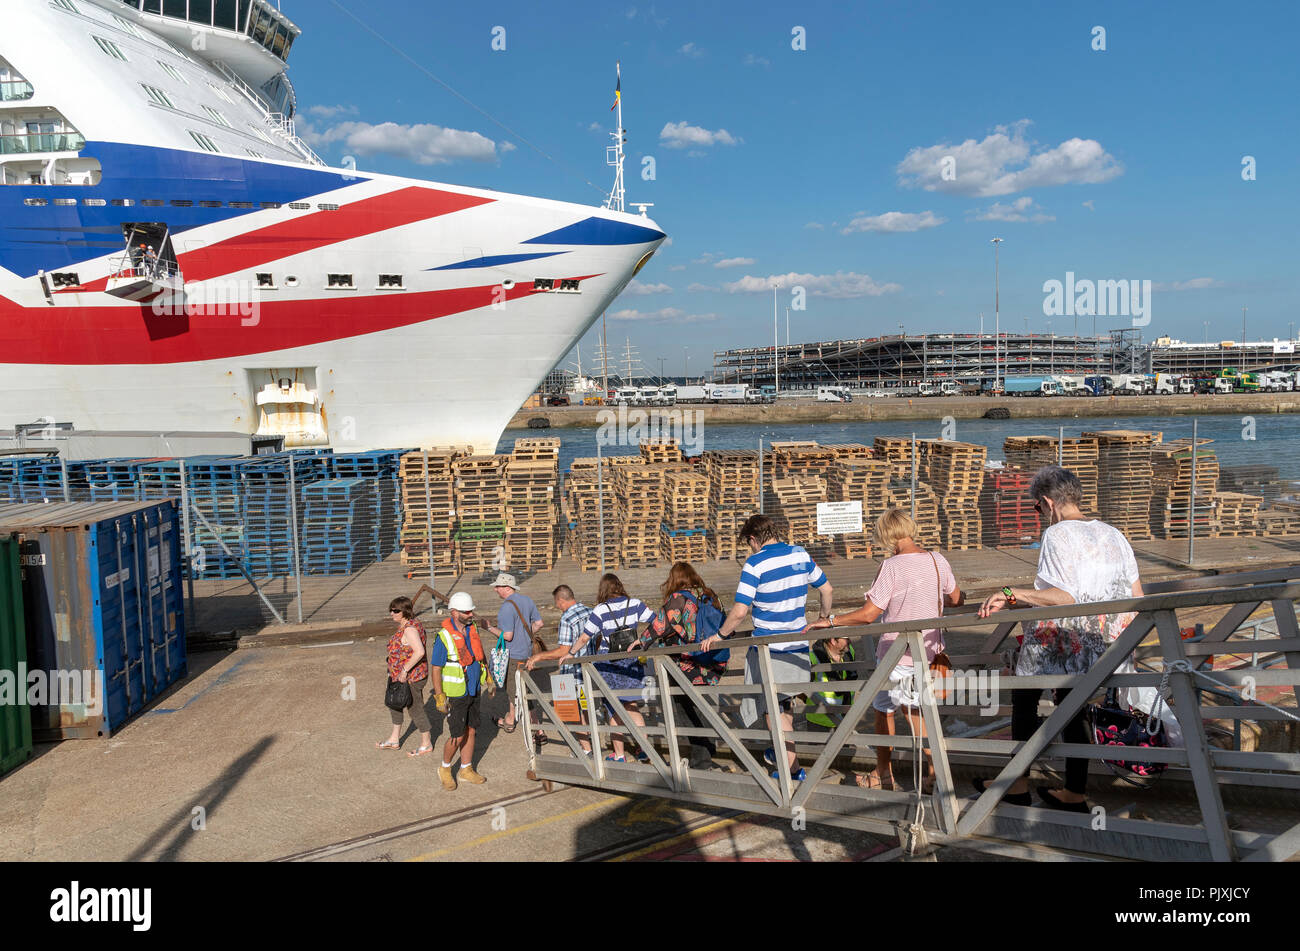 Ship's passengers arrive alongside port via a metal gangplank watched by a safety officer. A modern cruise ship in the background. Southampton, UK Stock Photo